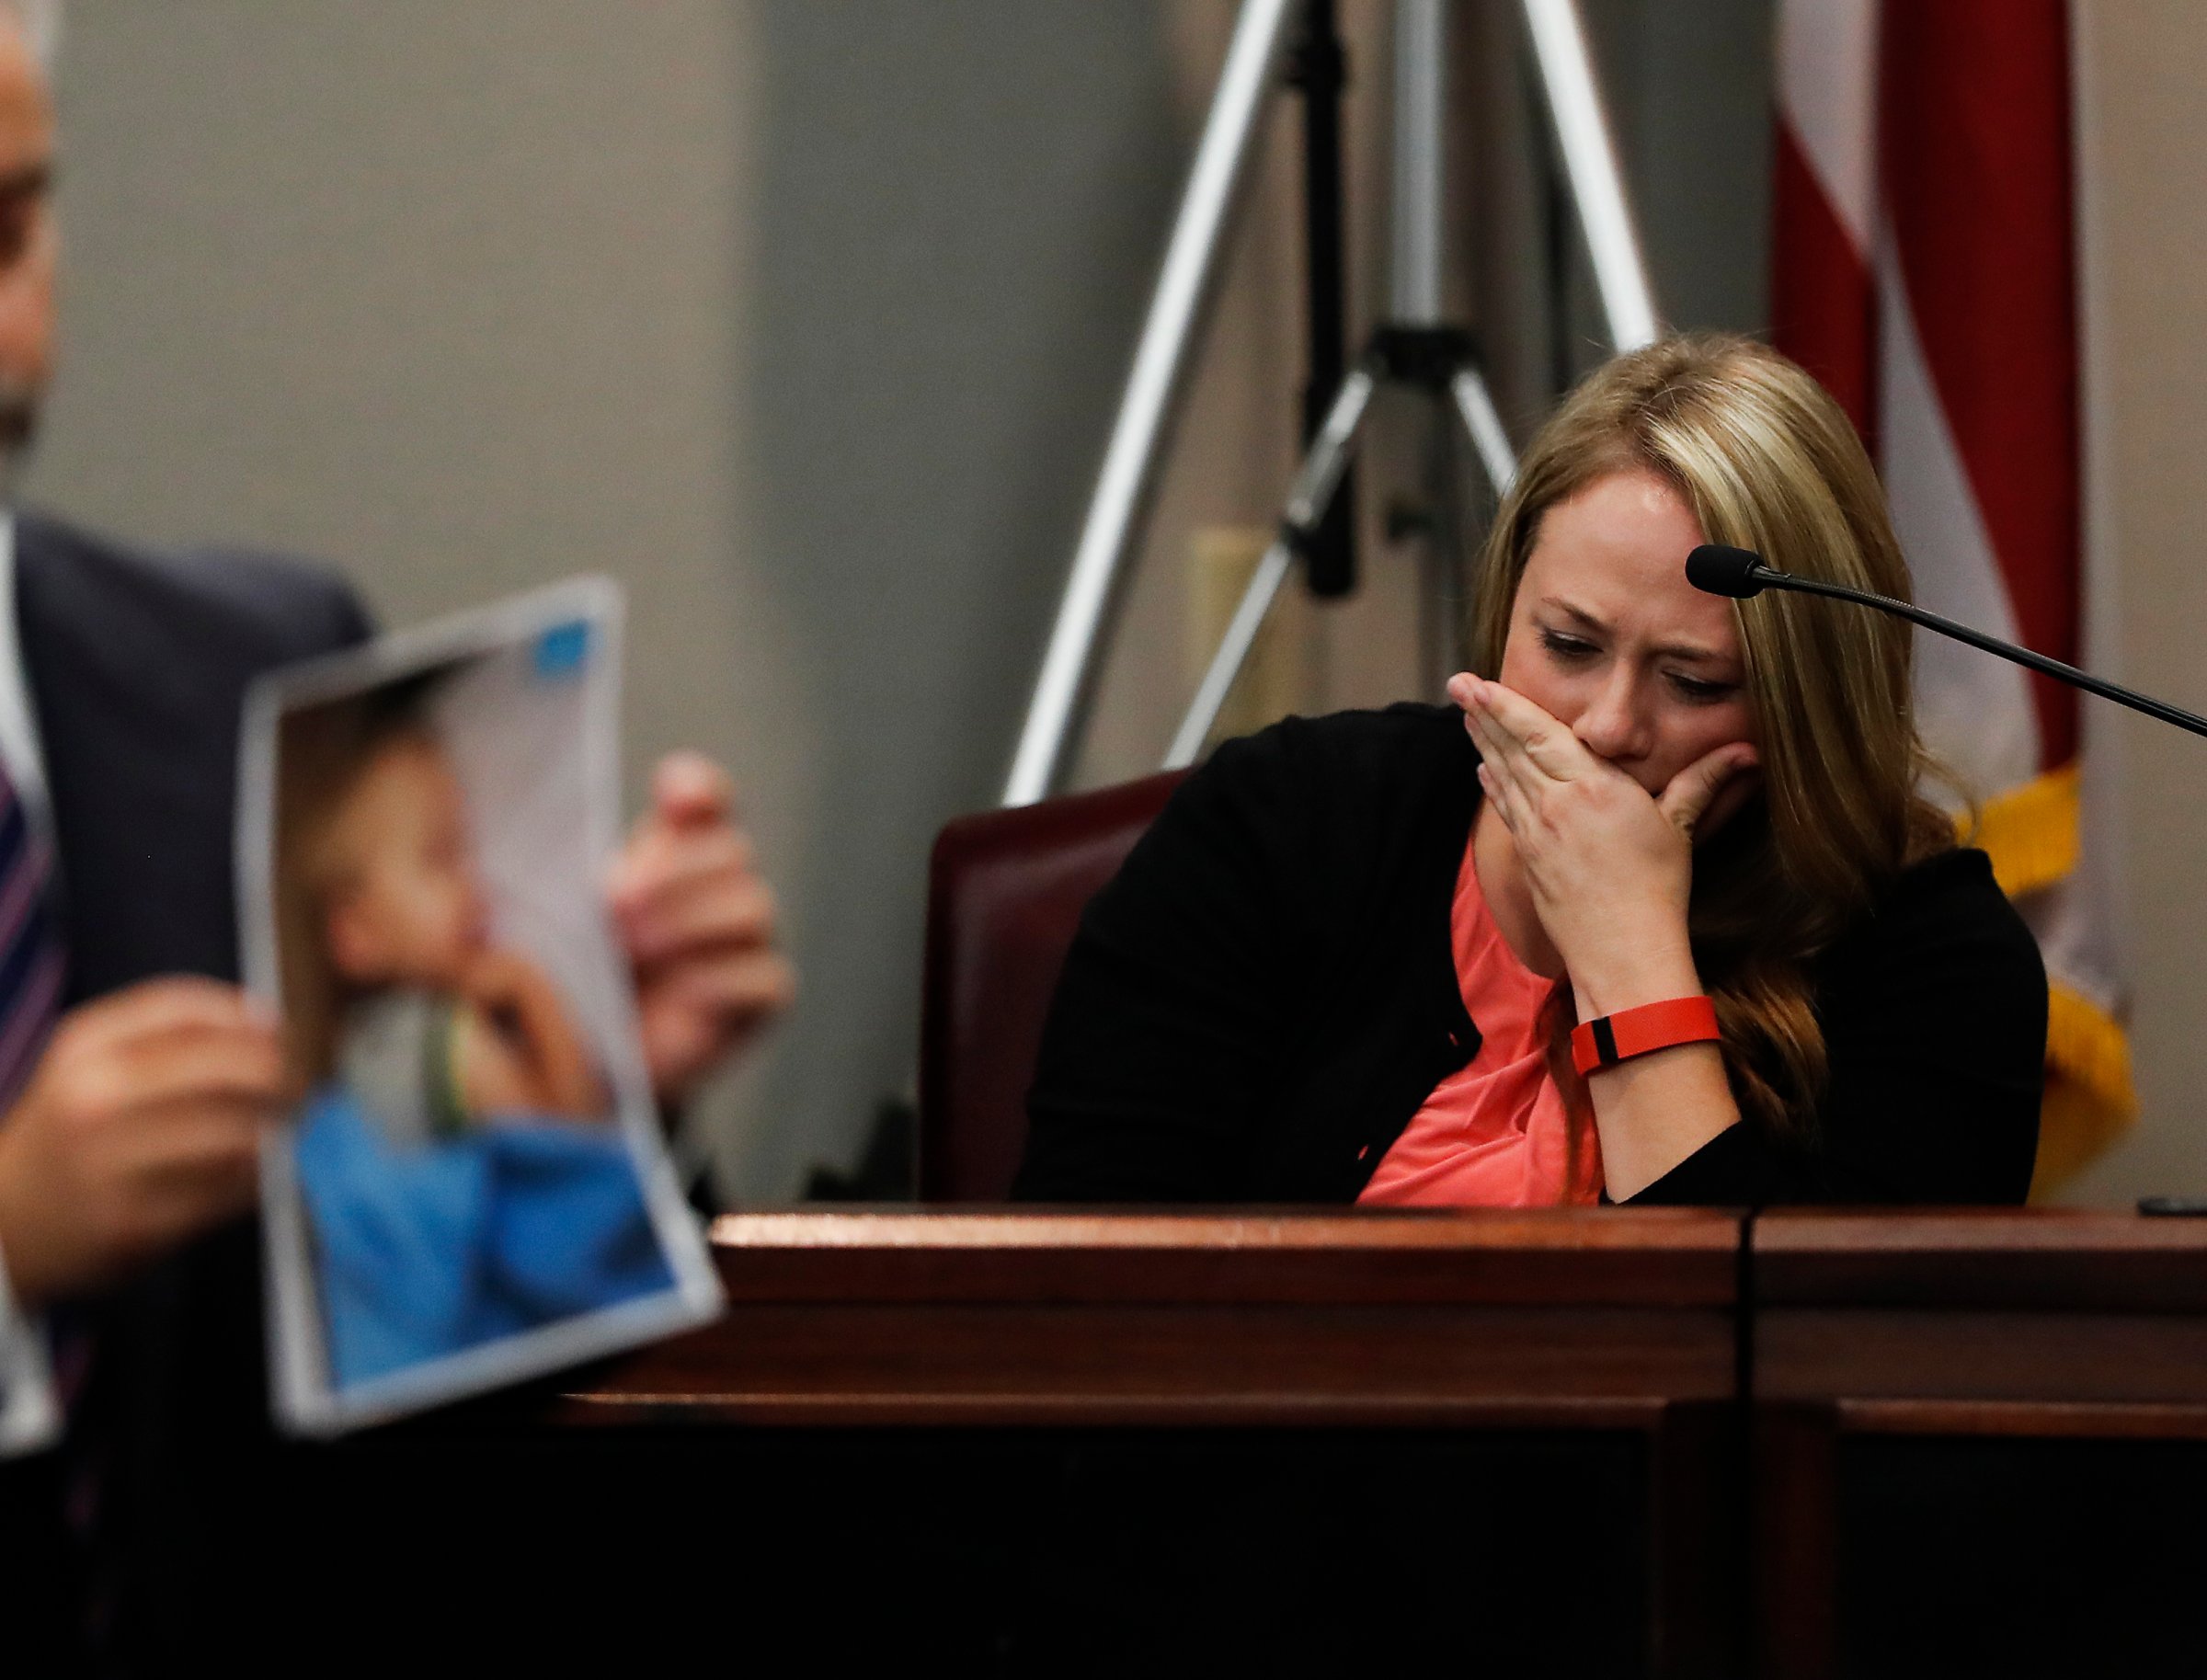 Leanna Taylor cries as an attorney shows photographs of her son Cooper to the jury during a murder trial for her ex-husband Justin Ross Harris, on Oct. 31, 2016, in Brunswick, Ga.